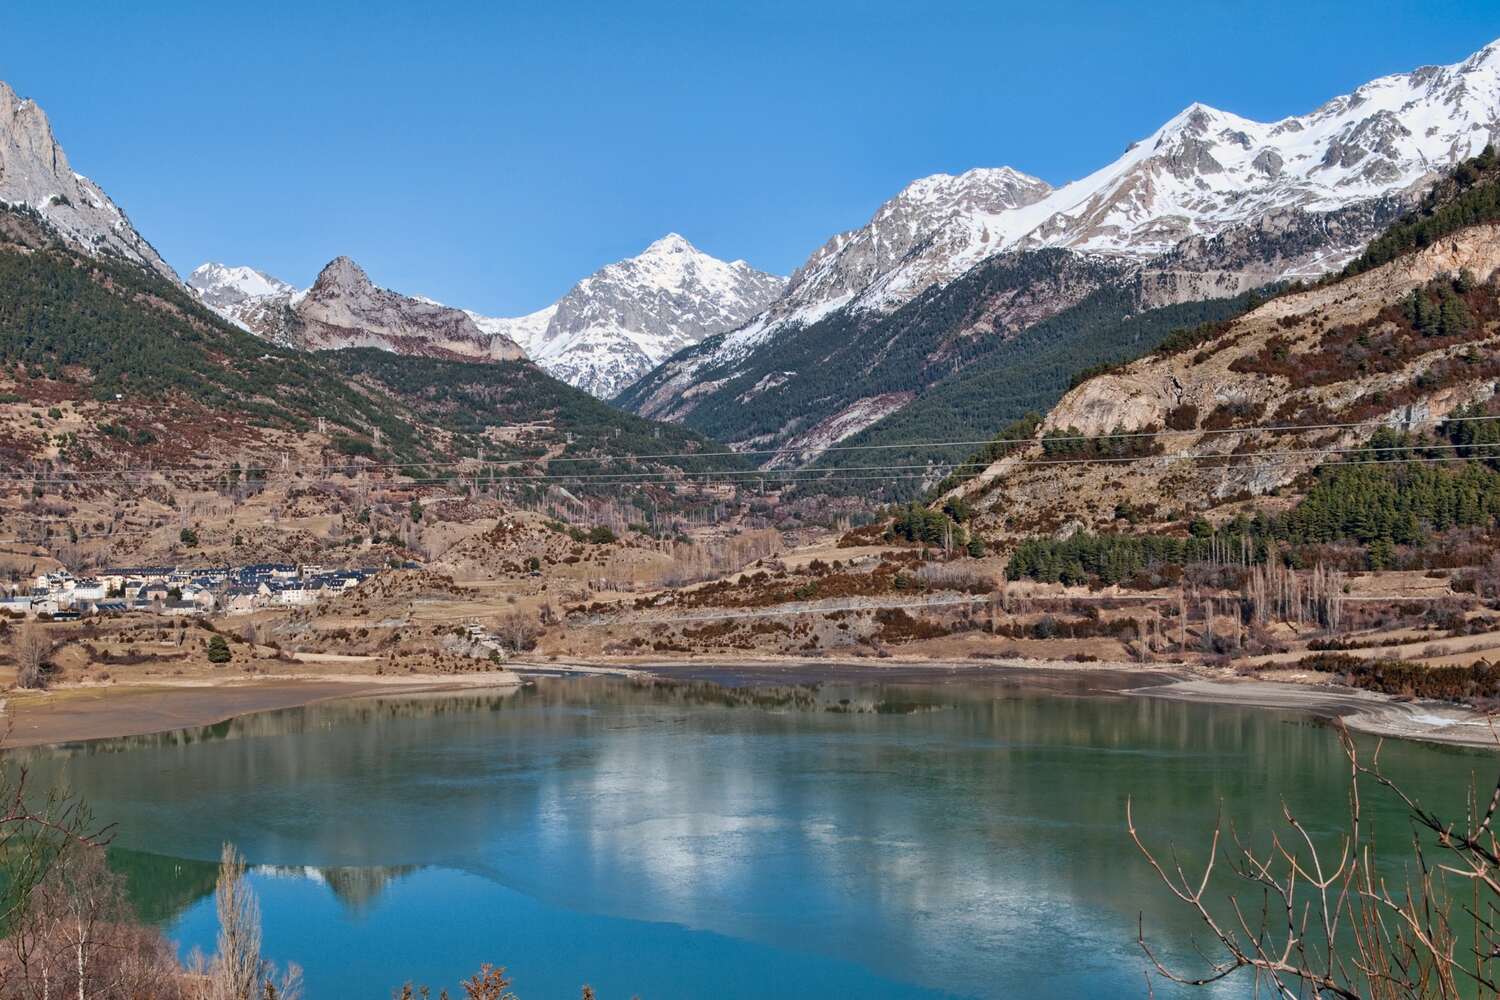 Reflective waters of a reservoir in front of the snow-capped peaks of the Spanish Pyrenees.